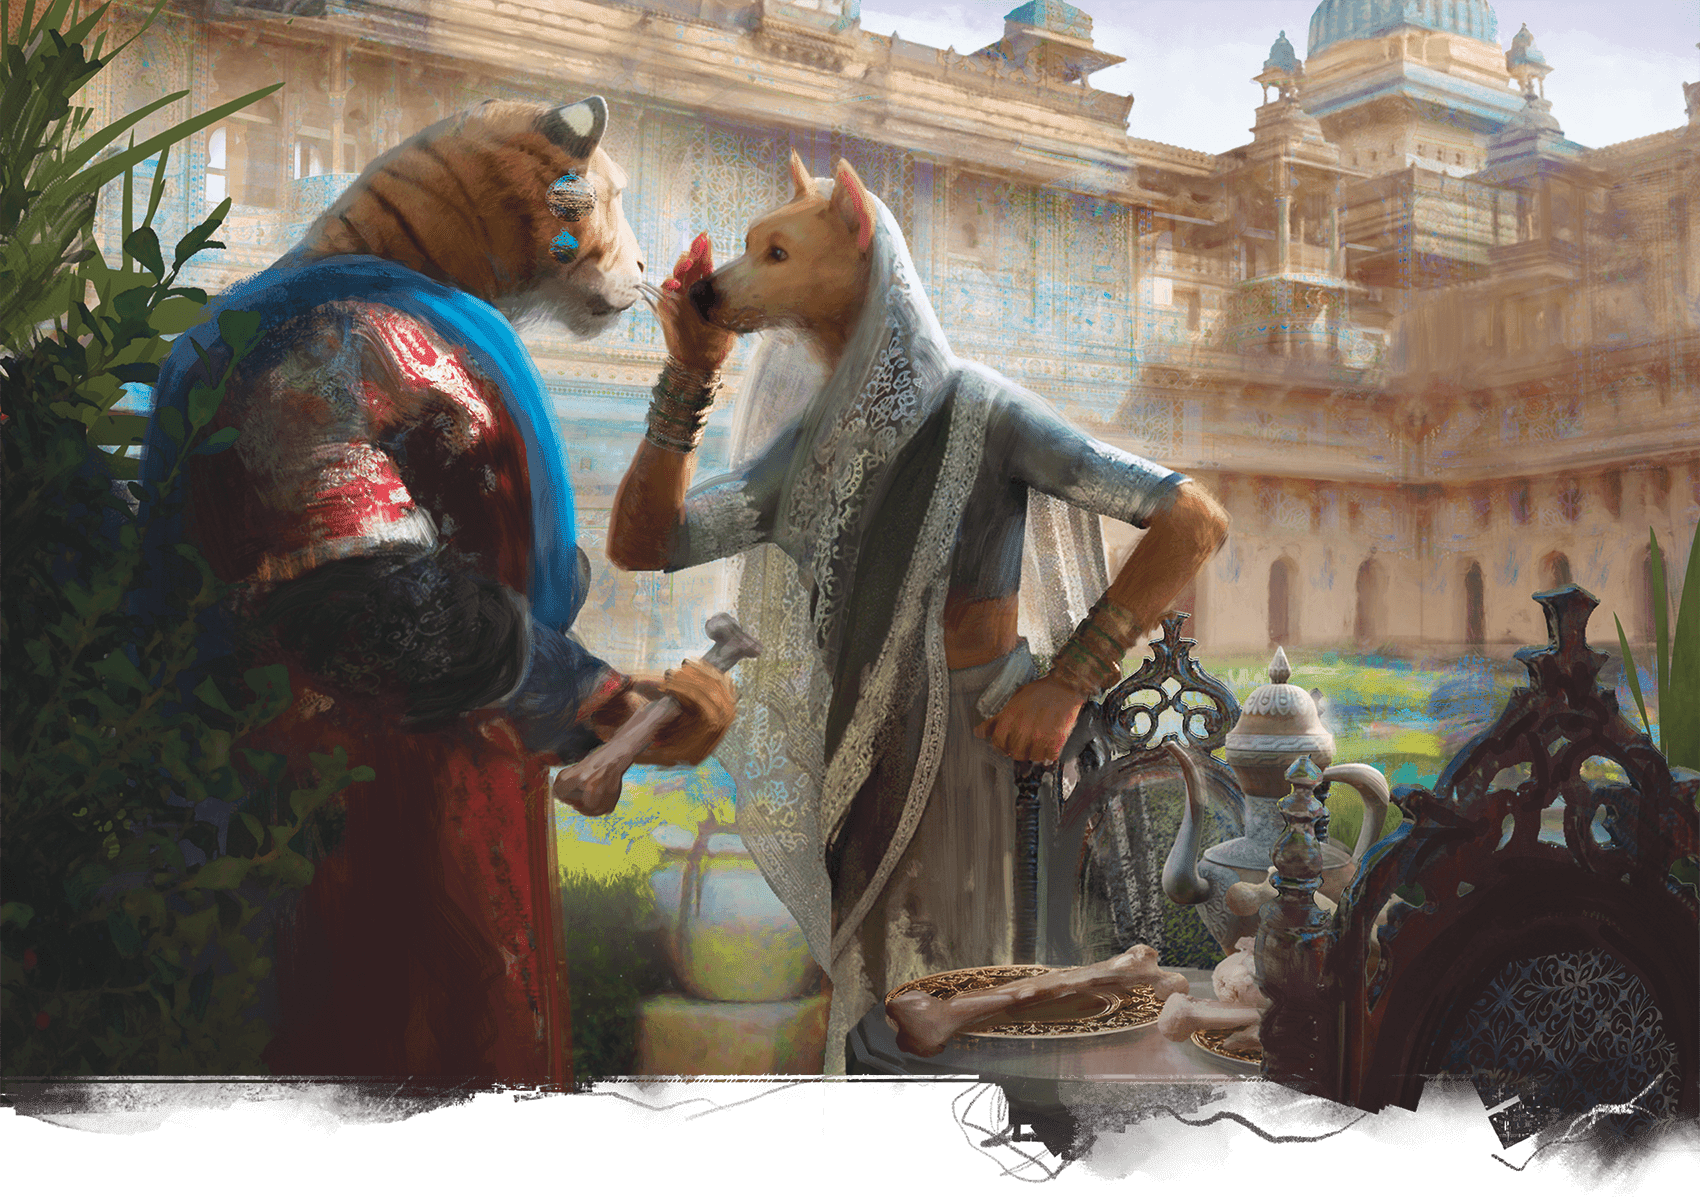 Ajit George: The Beautiful Challenge of Bringing India to D&D’s Ravenloft